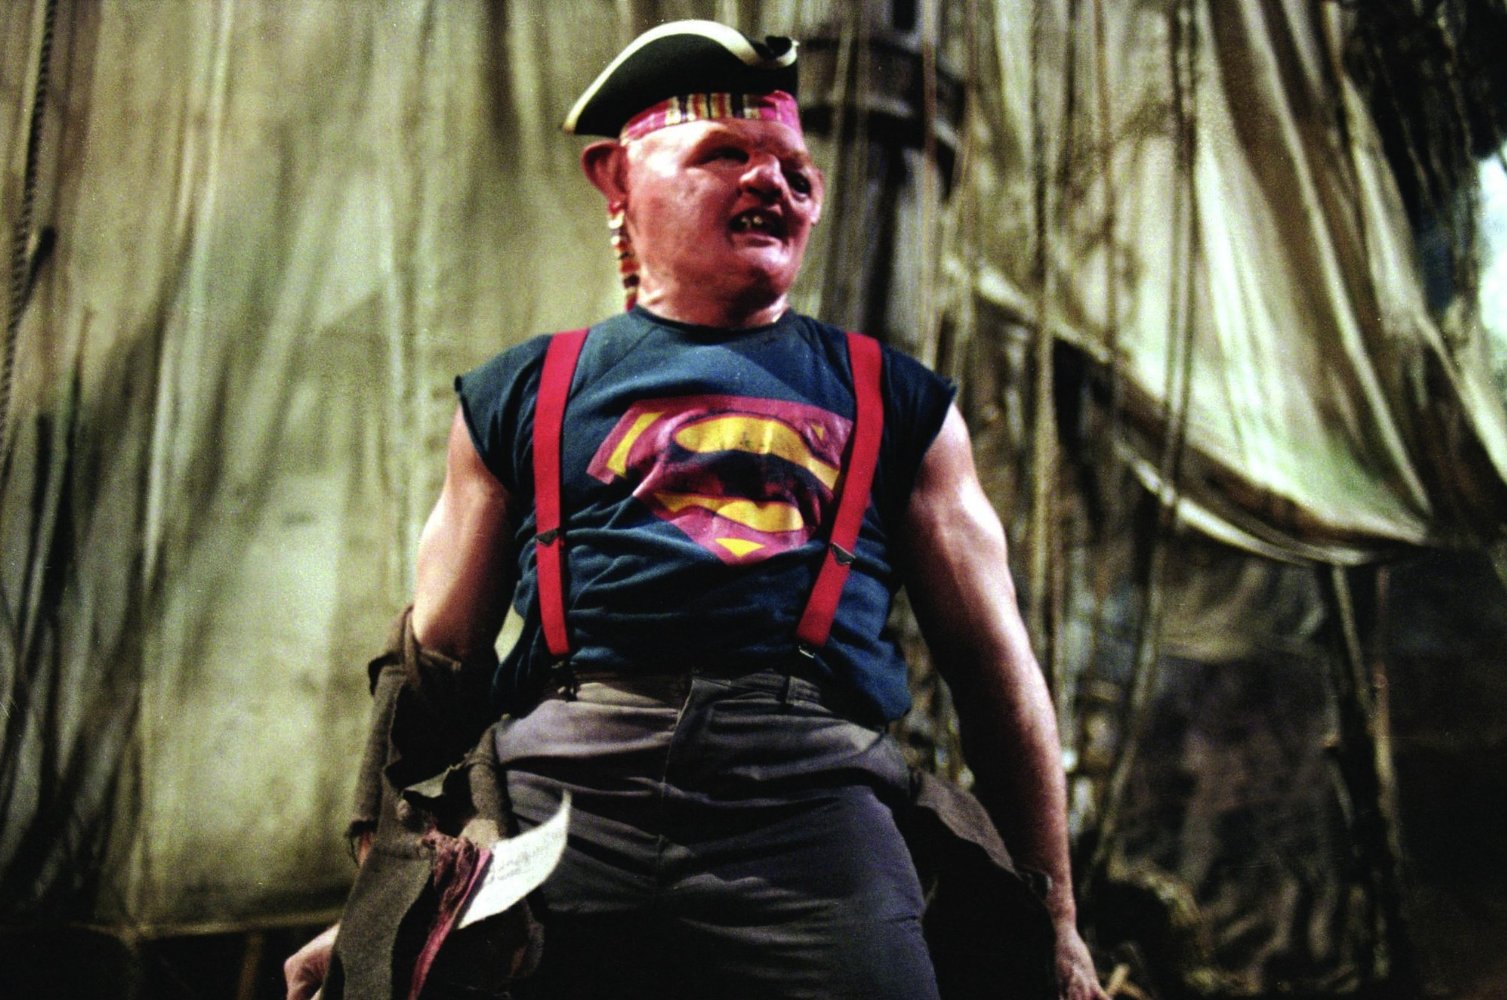 Sloth from goonies | Straight bunch Wiki | FANDOM powered ...